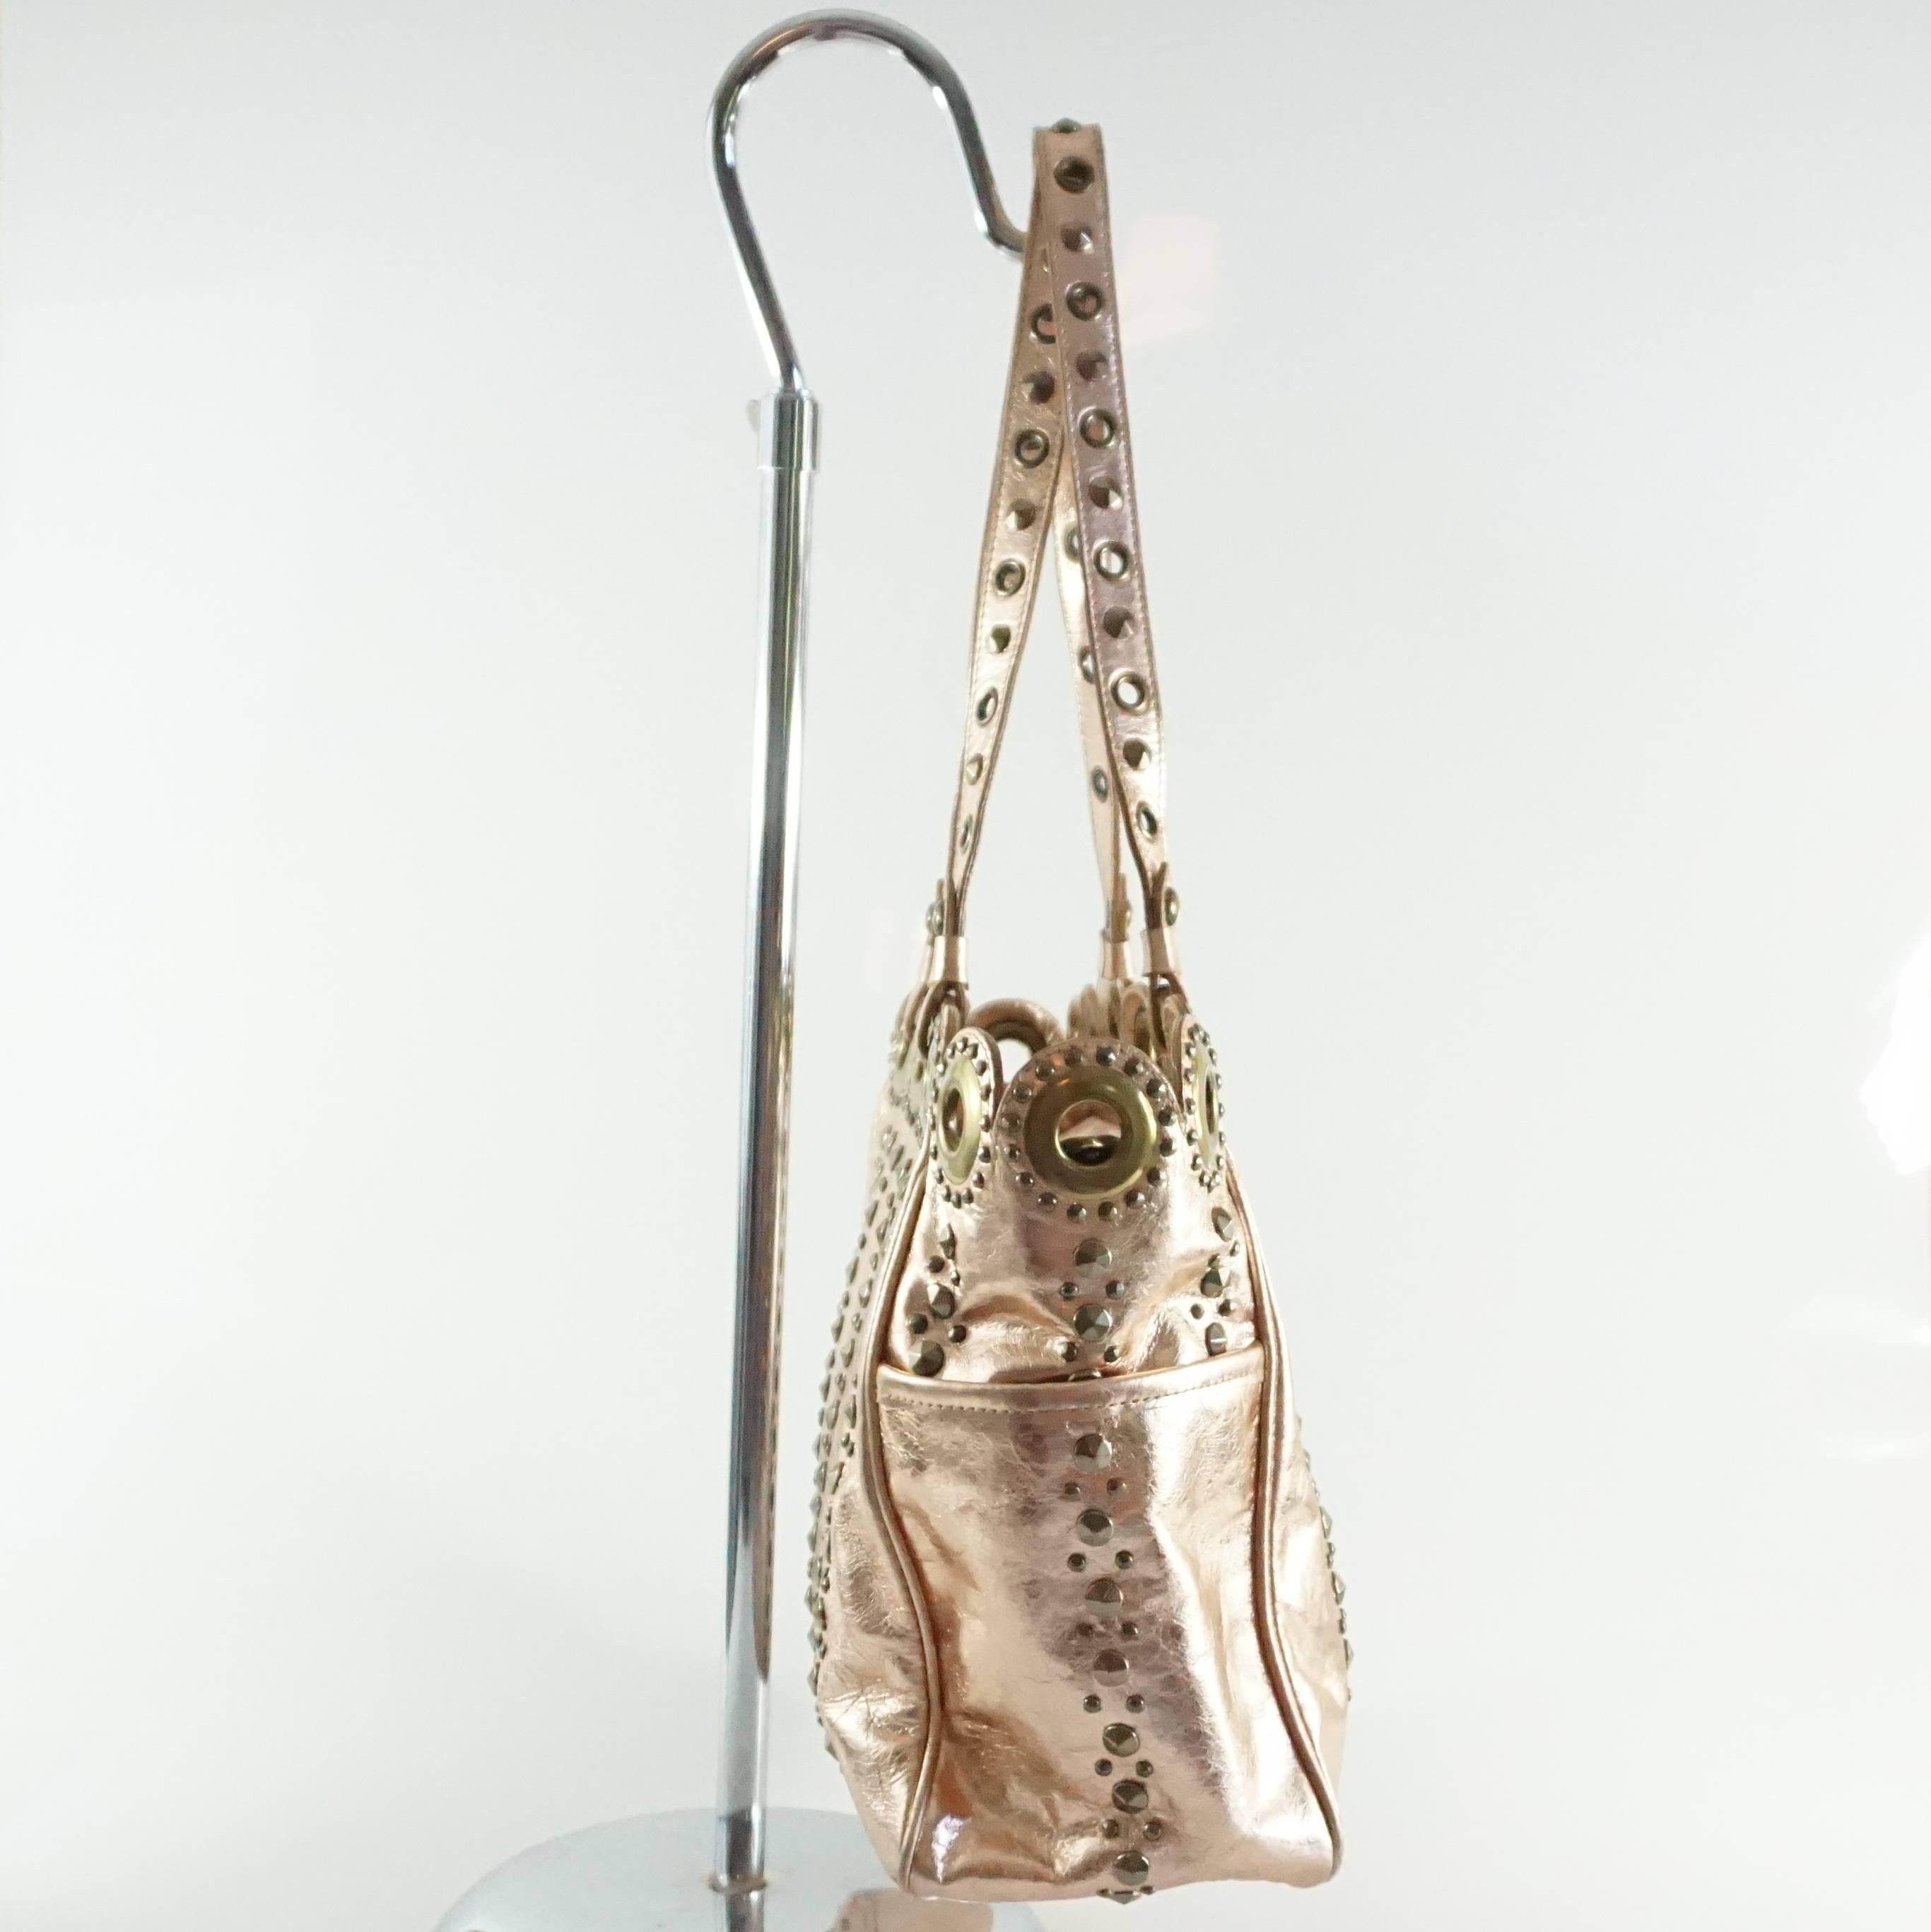 This Isabella Fiore leather shoulder bag is a metallic rose gold with dark gold studs and grommets all over. The top of the bag has a wavy shape with thin shoulder straps. The bag also has a zipper closure, 2 exterior small pockets, 1 large interior